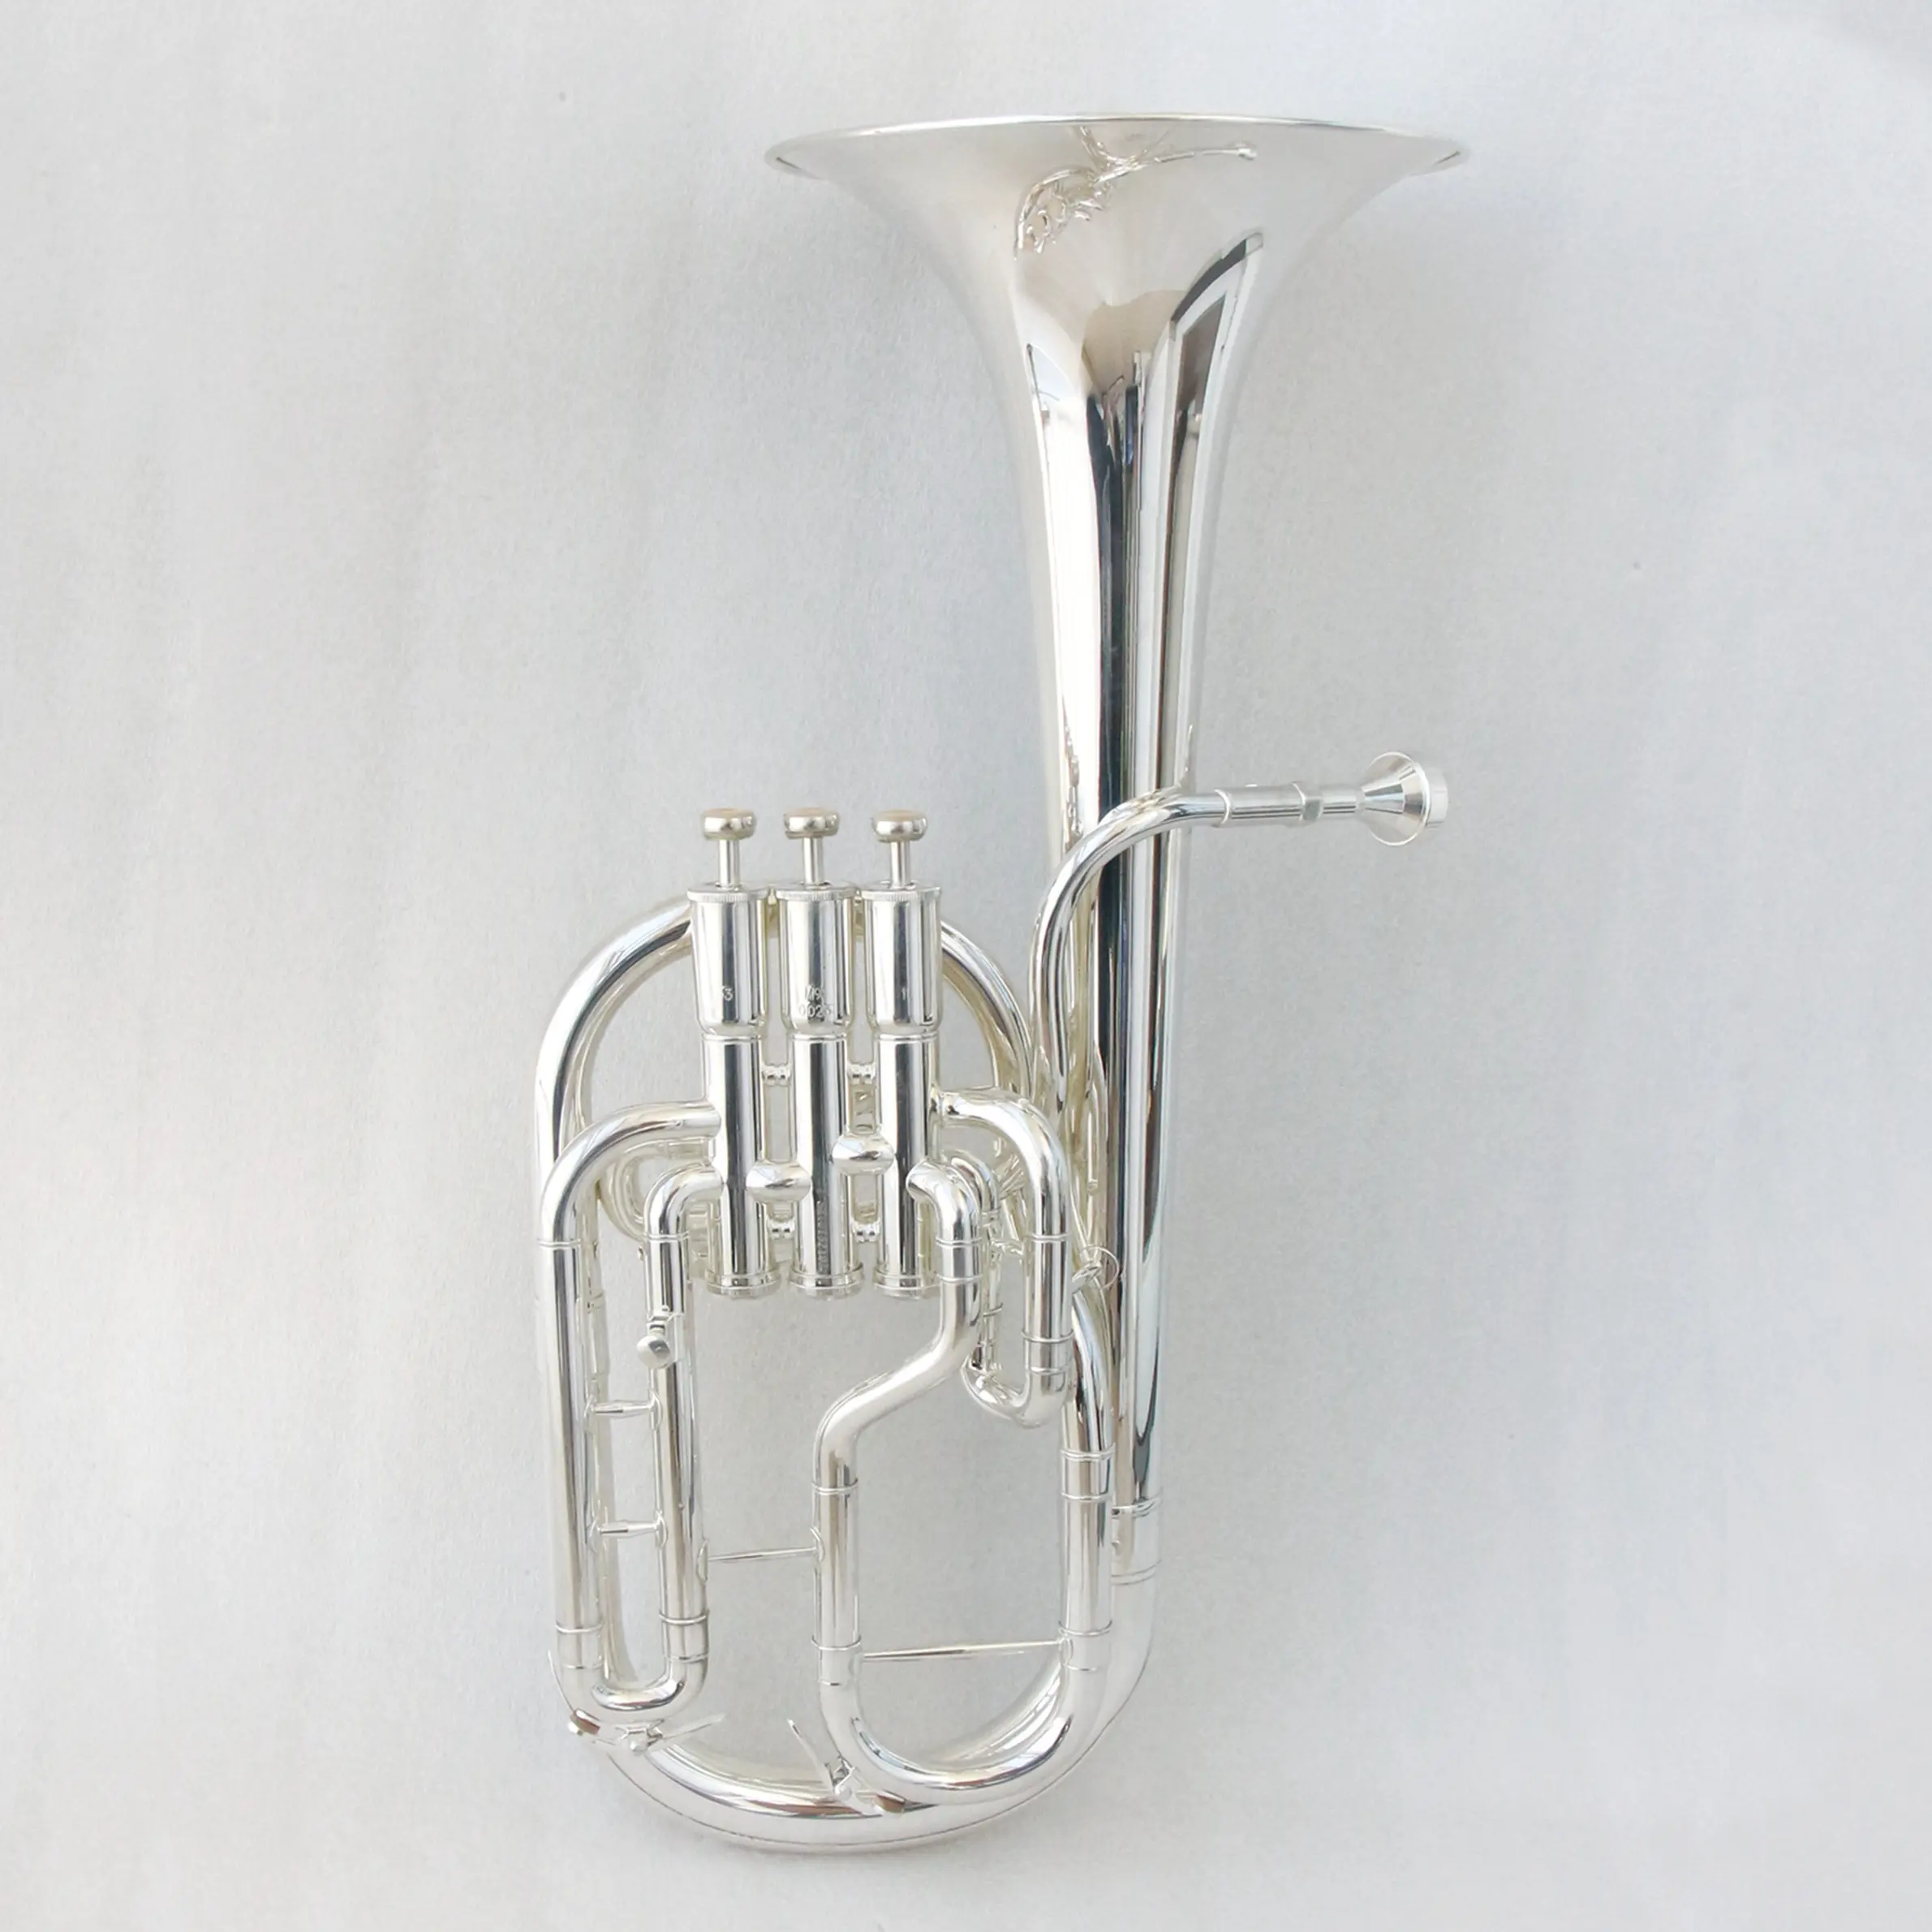 Chinese high level horn instrument saxhorn for sale Eb tenor horn silver plated alto horn